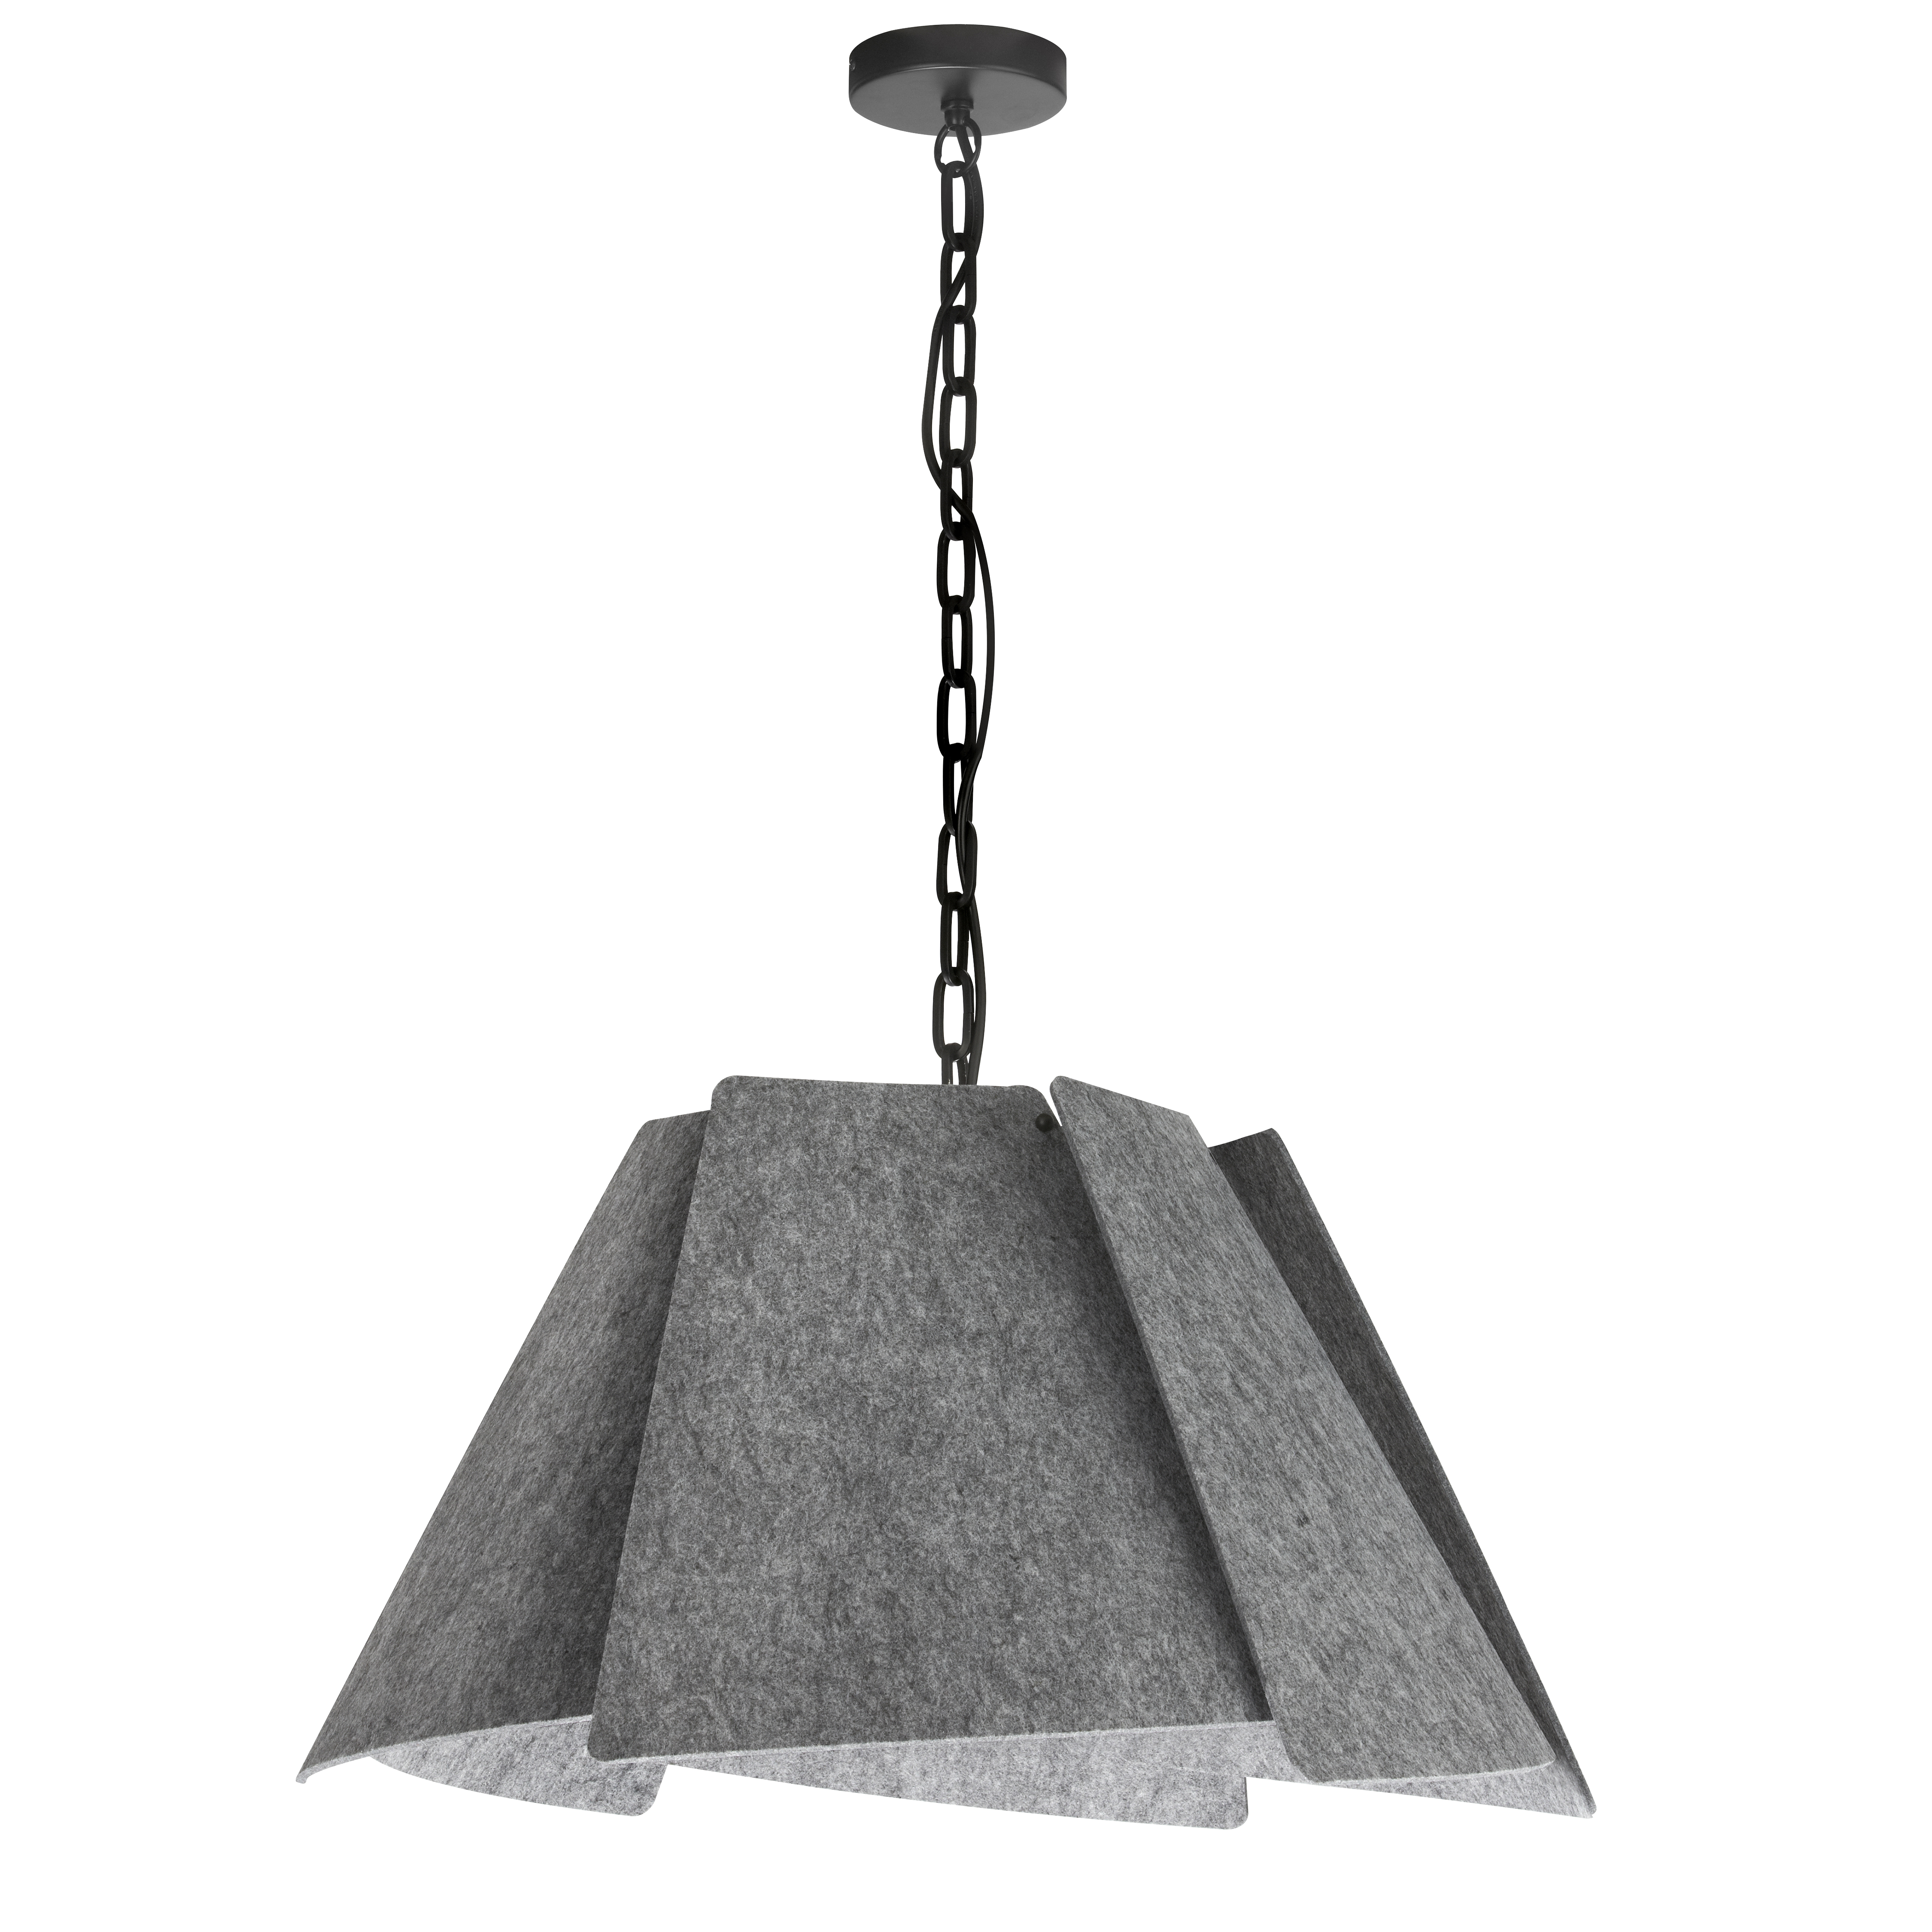 Artful Philomena lighting features a textural, dimensional look that draws attention, but won't overwhelm the surrounding furnishings. With its emphasis on fabric and draping, it works well with many home décors. A chain drop and frame in matte black are overshadowed by a wonderfully detailed fabric shade. The gray felt shade is tapered, with the fabric draped round it in eye-catching pleats. The effect is fashionable, and will enhance your mid-century to contemporary living and dining rooms, and create a chic focal point in the foyer.